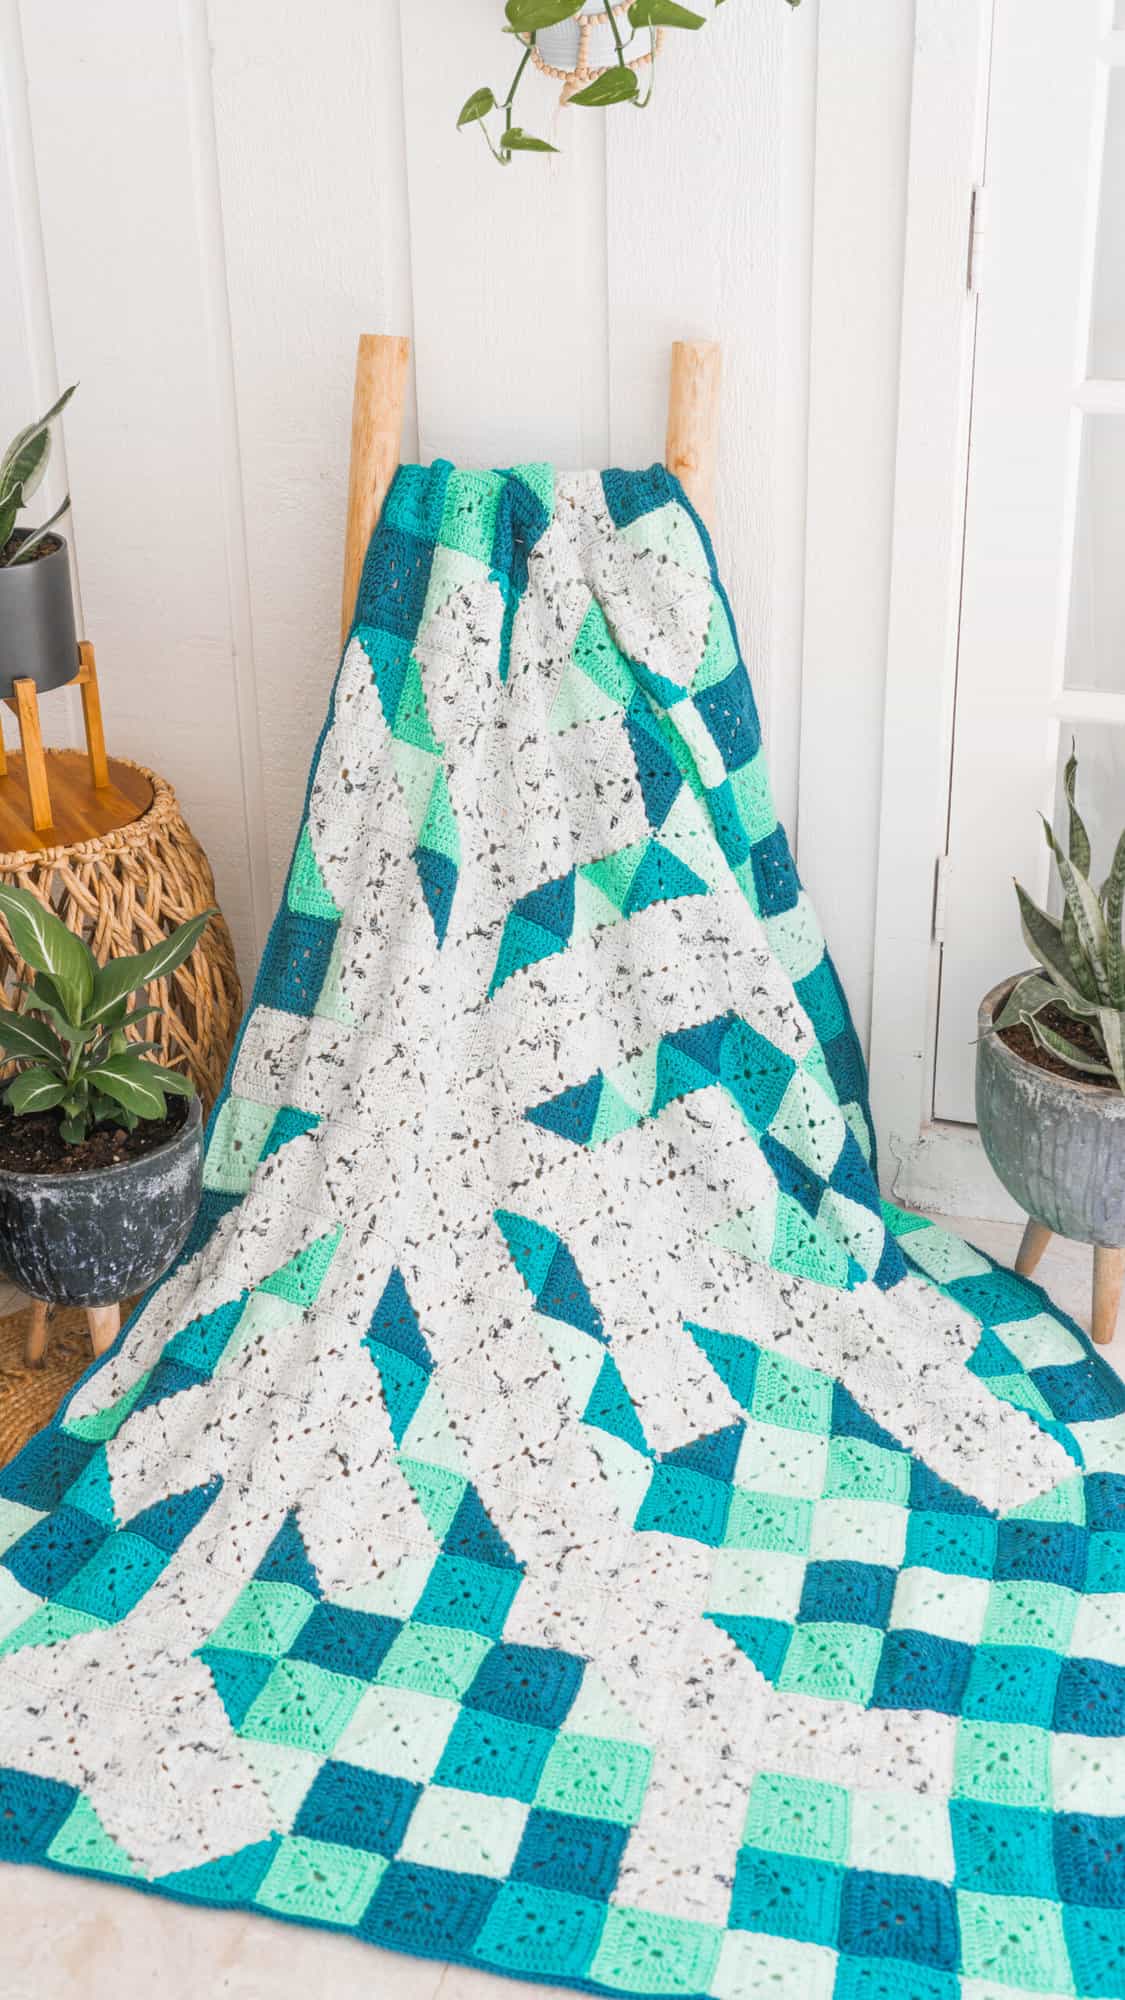 Craft An Easy Granny Square Snowflake Blanket With This Free Pattern